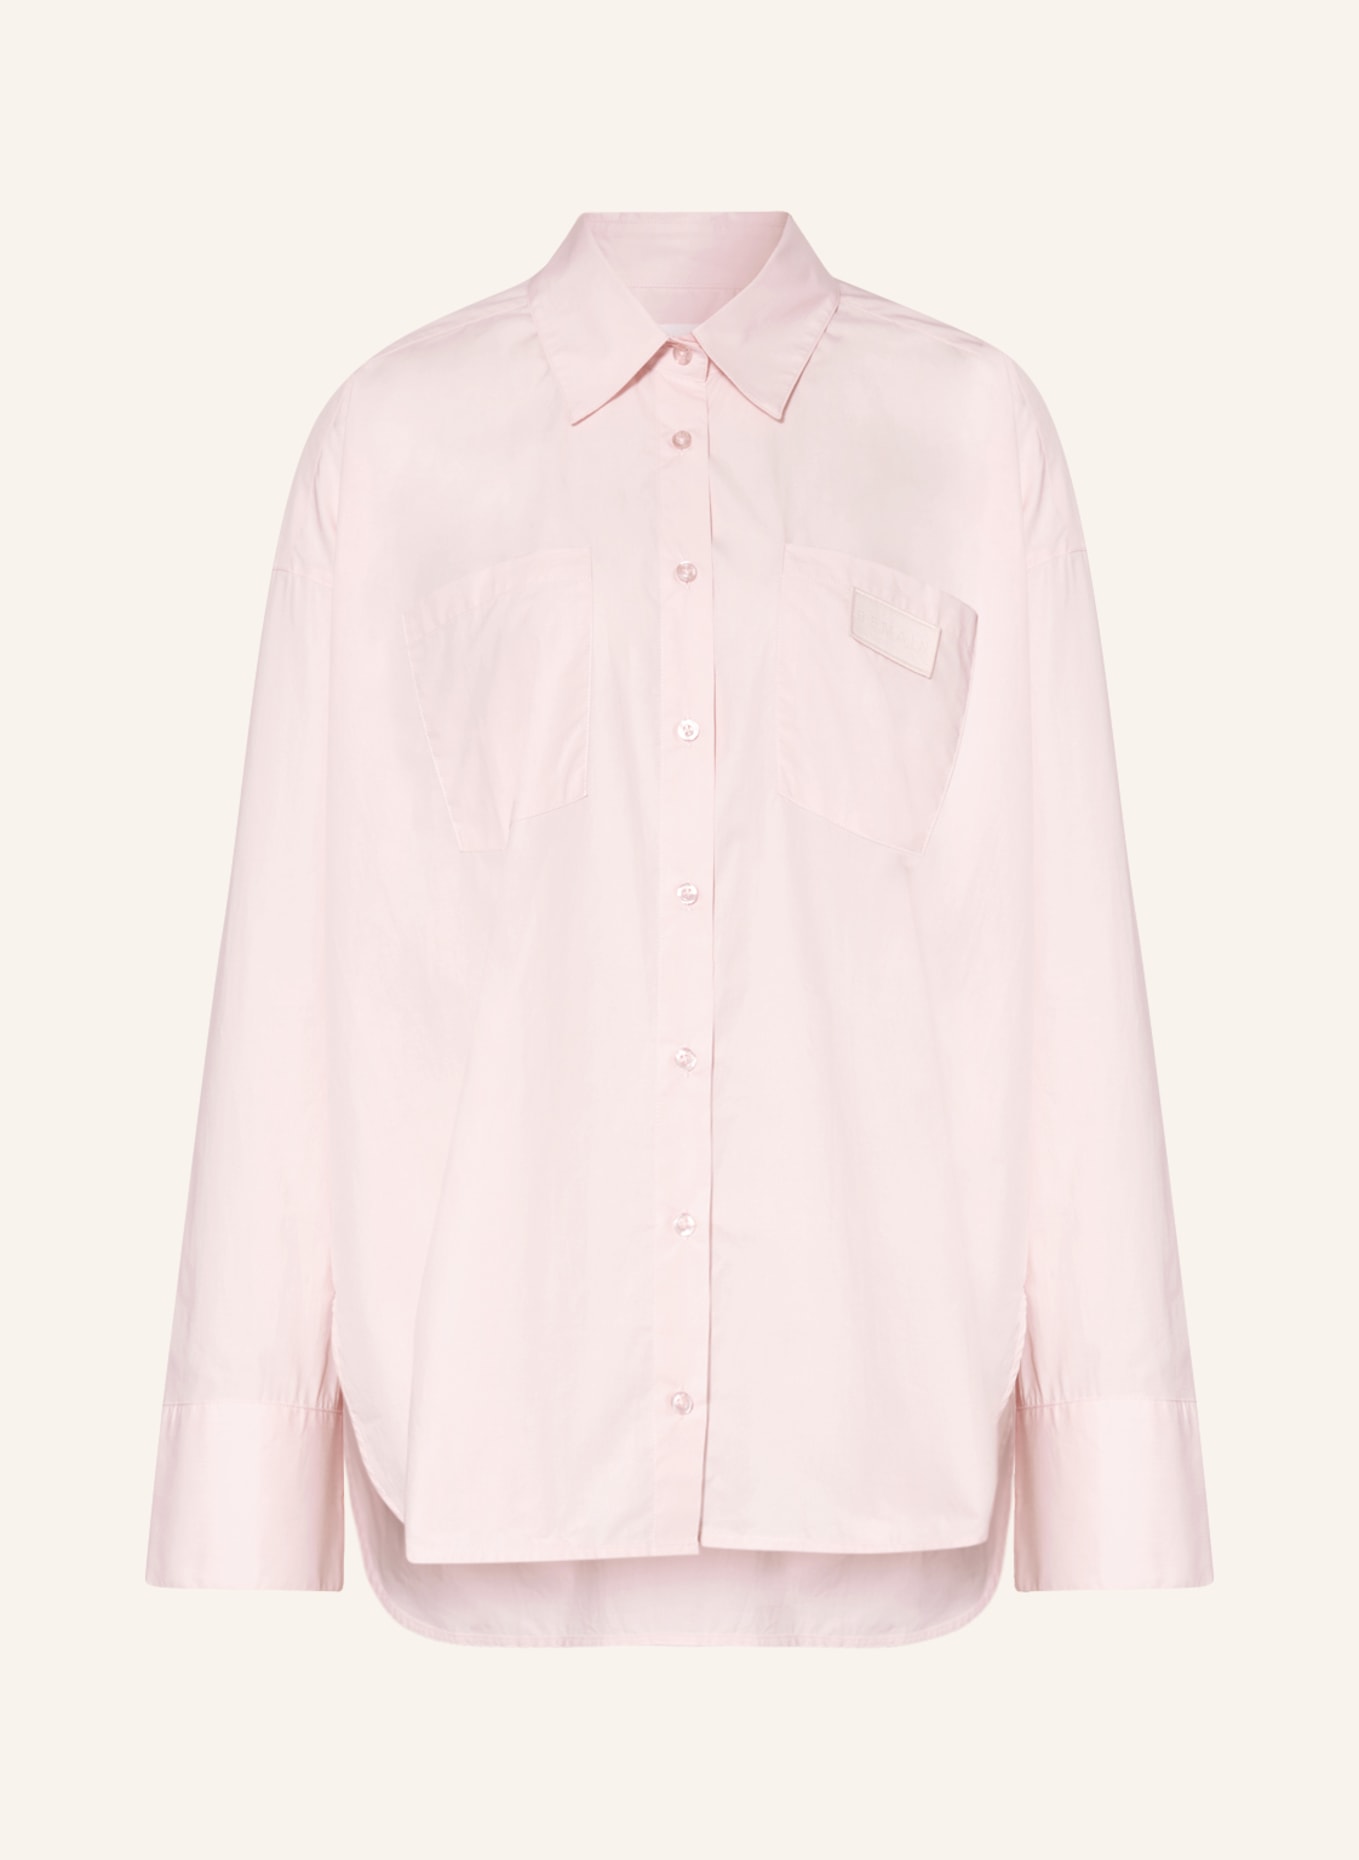 REMAIN Oversized shirt blouse, Color: LIGHT PINK (Image 1)